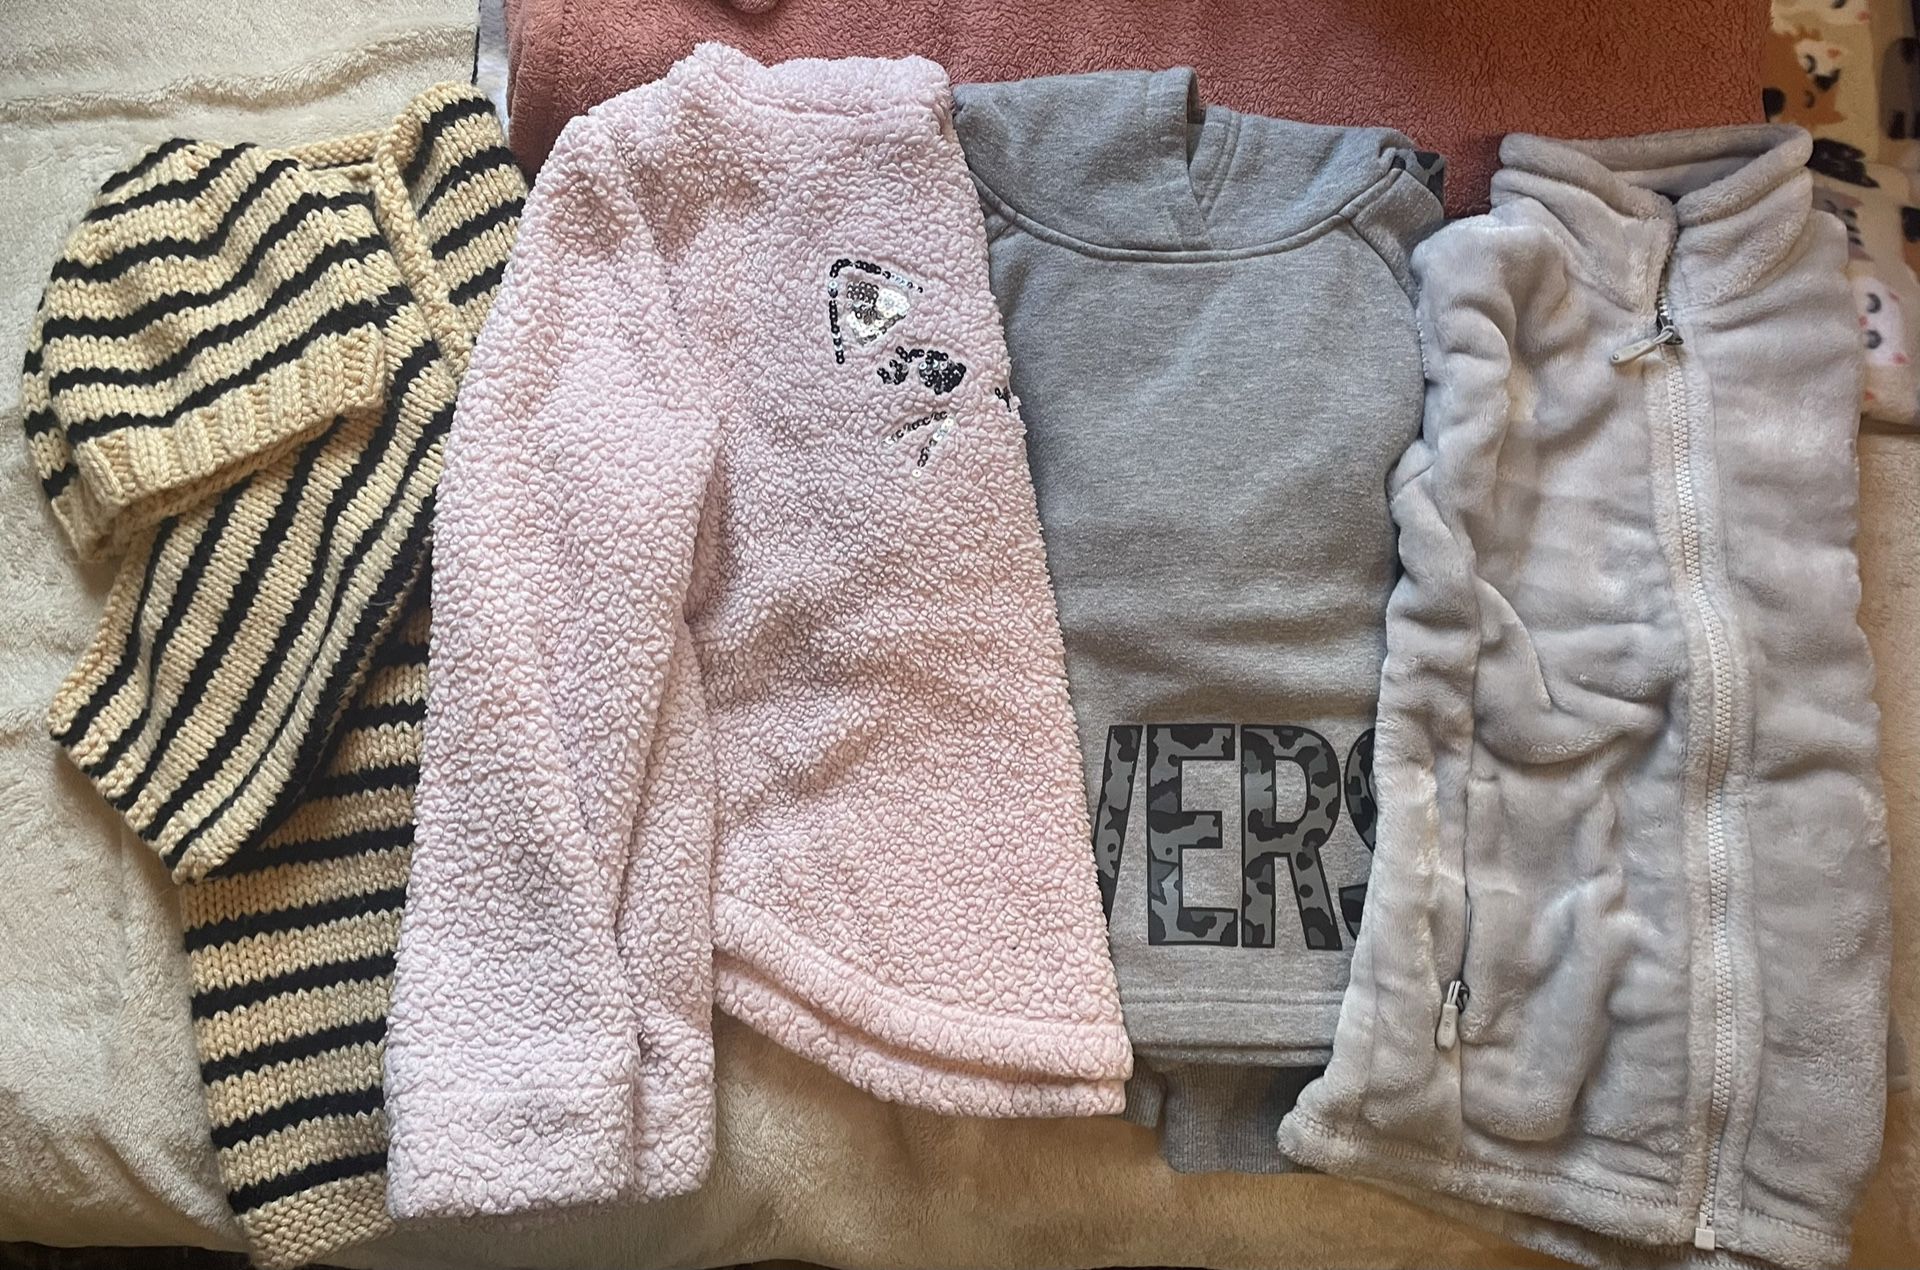 Lot Of 4 Girls Size 7 Jackets/Hoodies 🌸$7 For ALL🌸